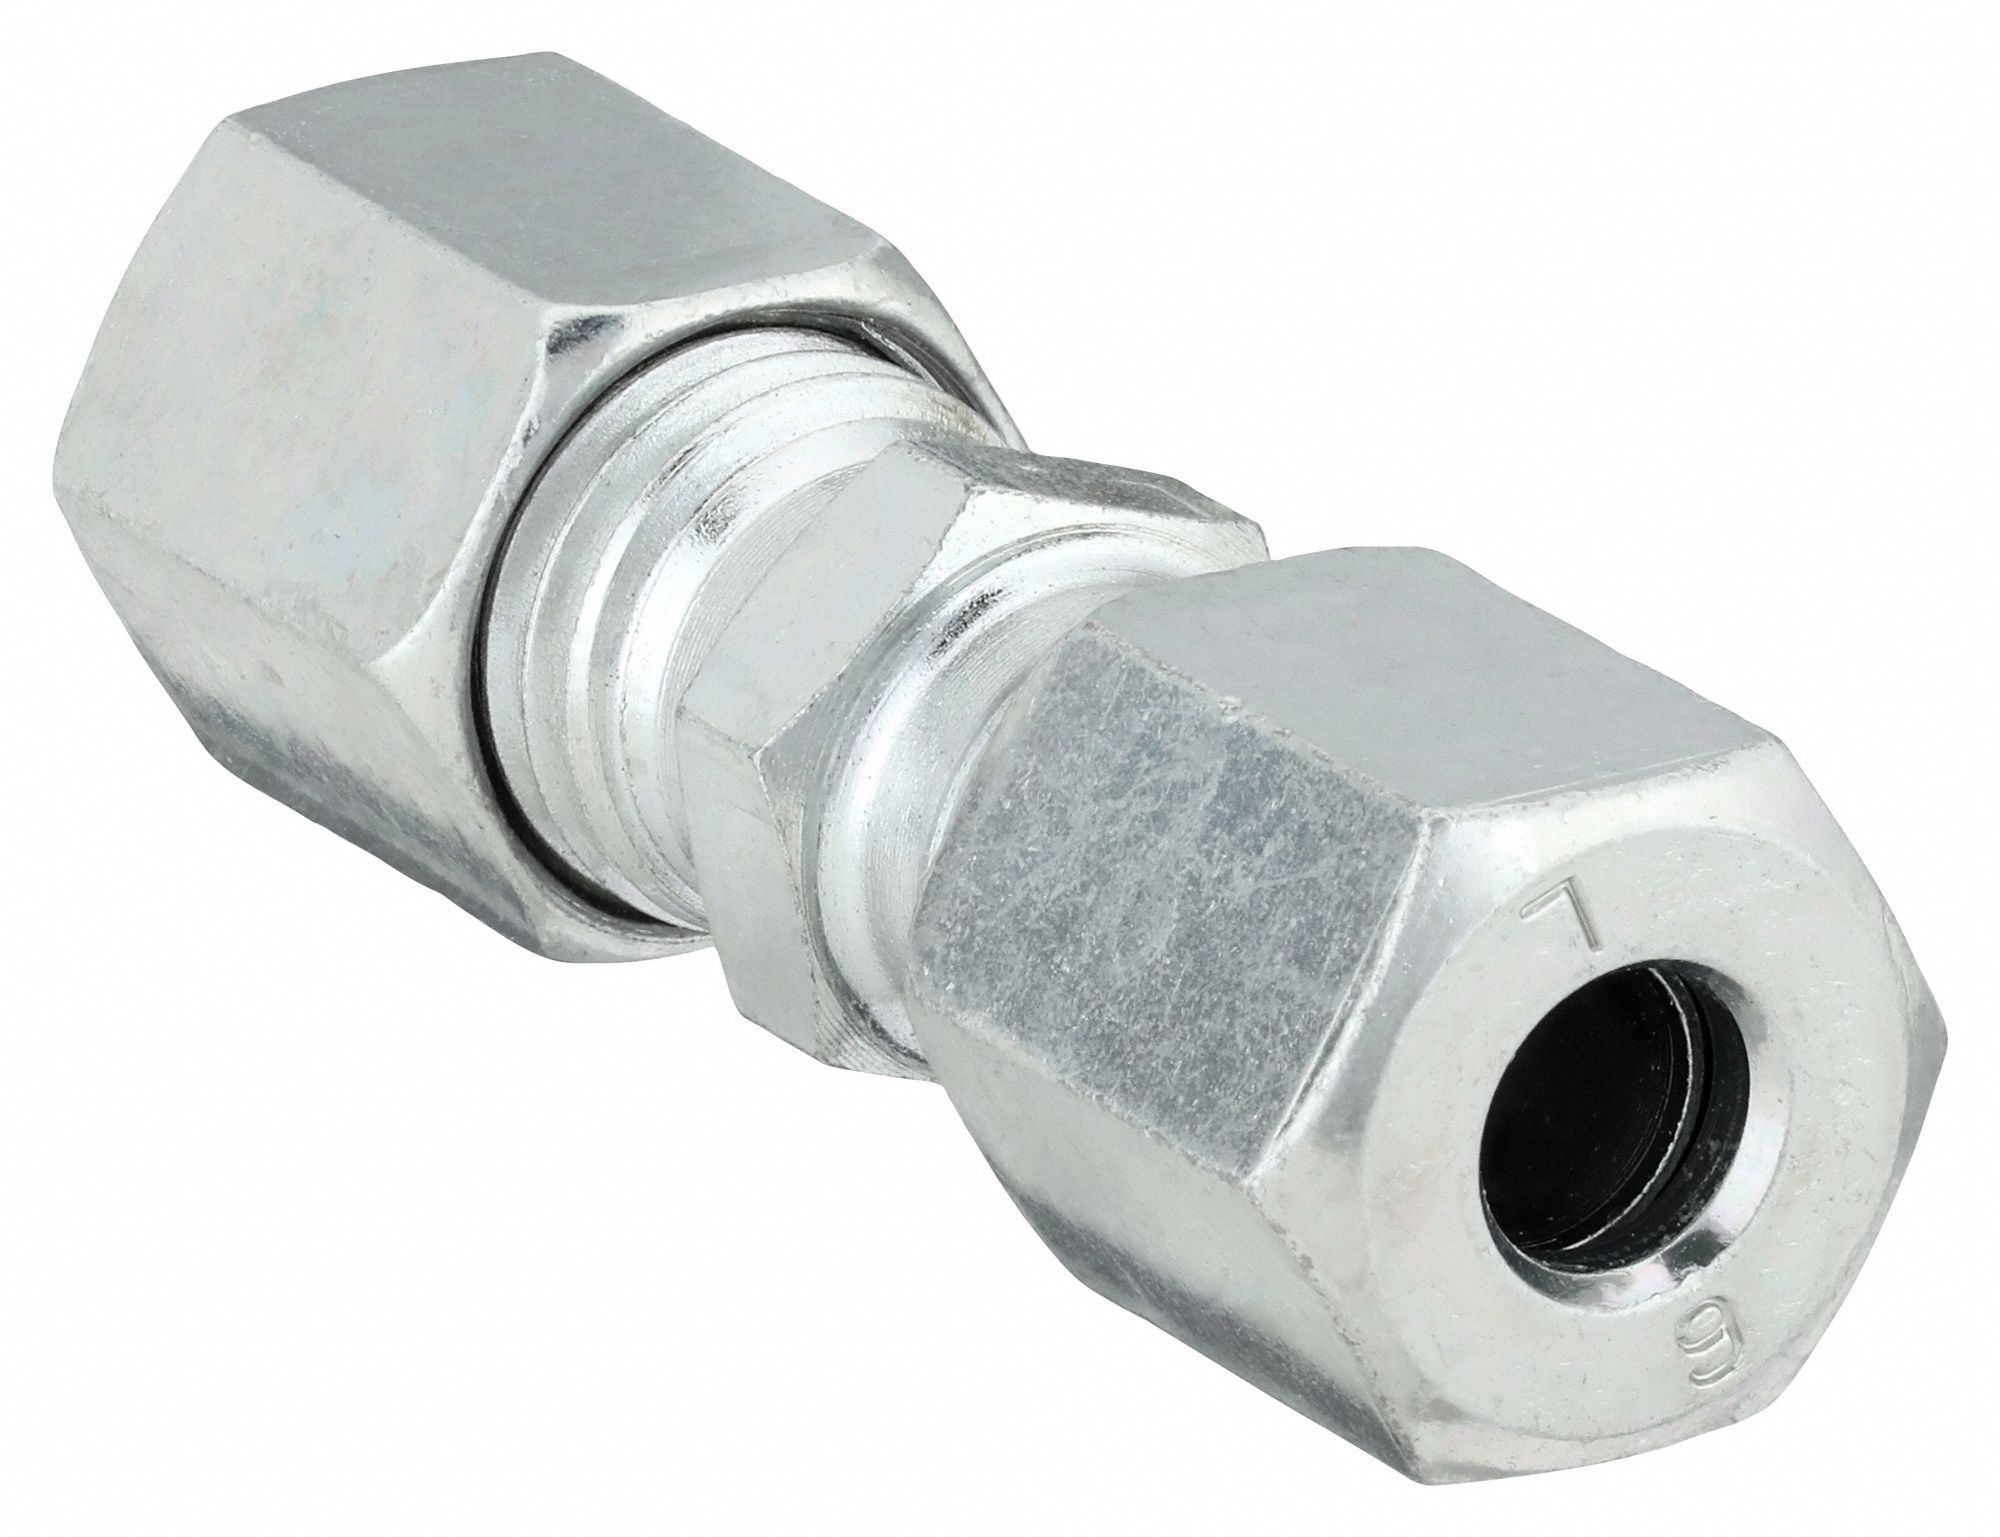 HATEC FITTING,COMPRESSION,STRAIGHT,M12X1.5 - Compression Tube Fittings -  WWG19MR44